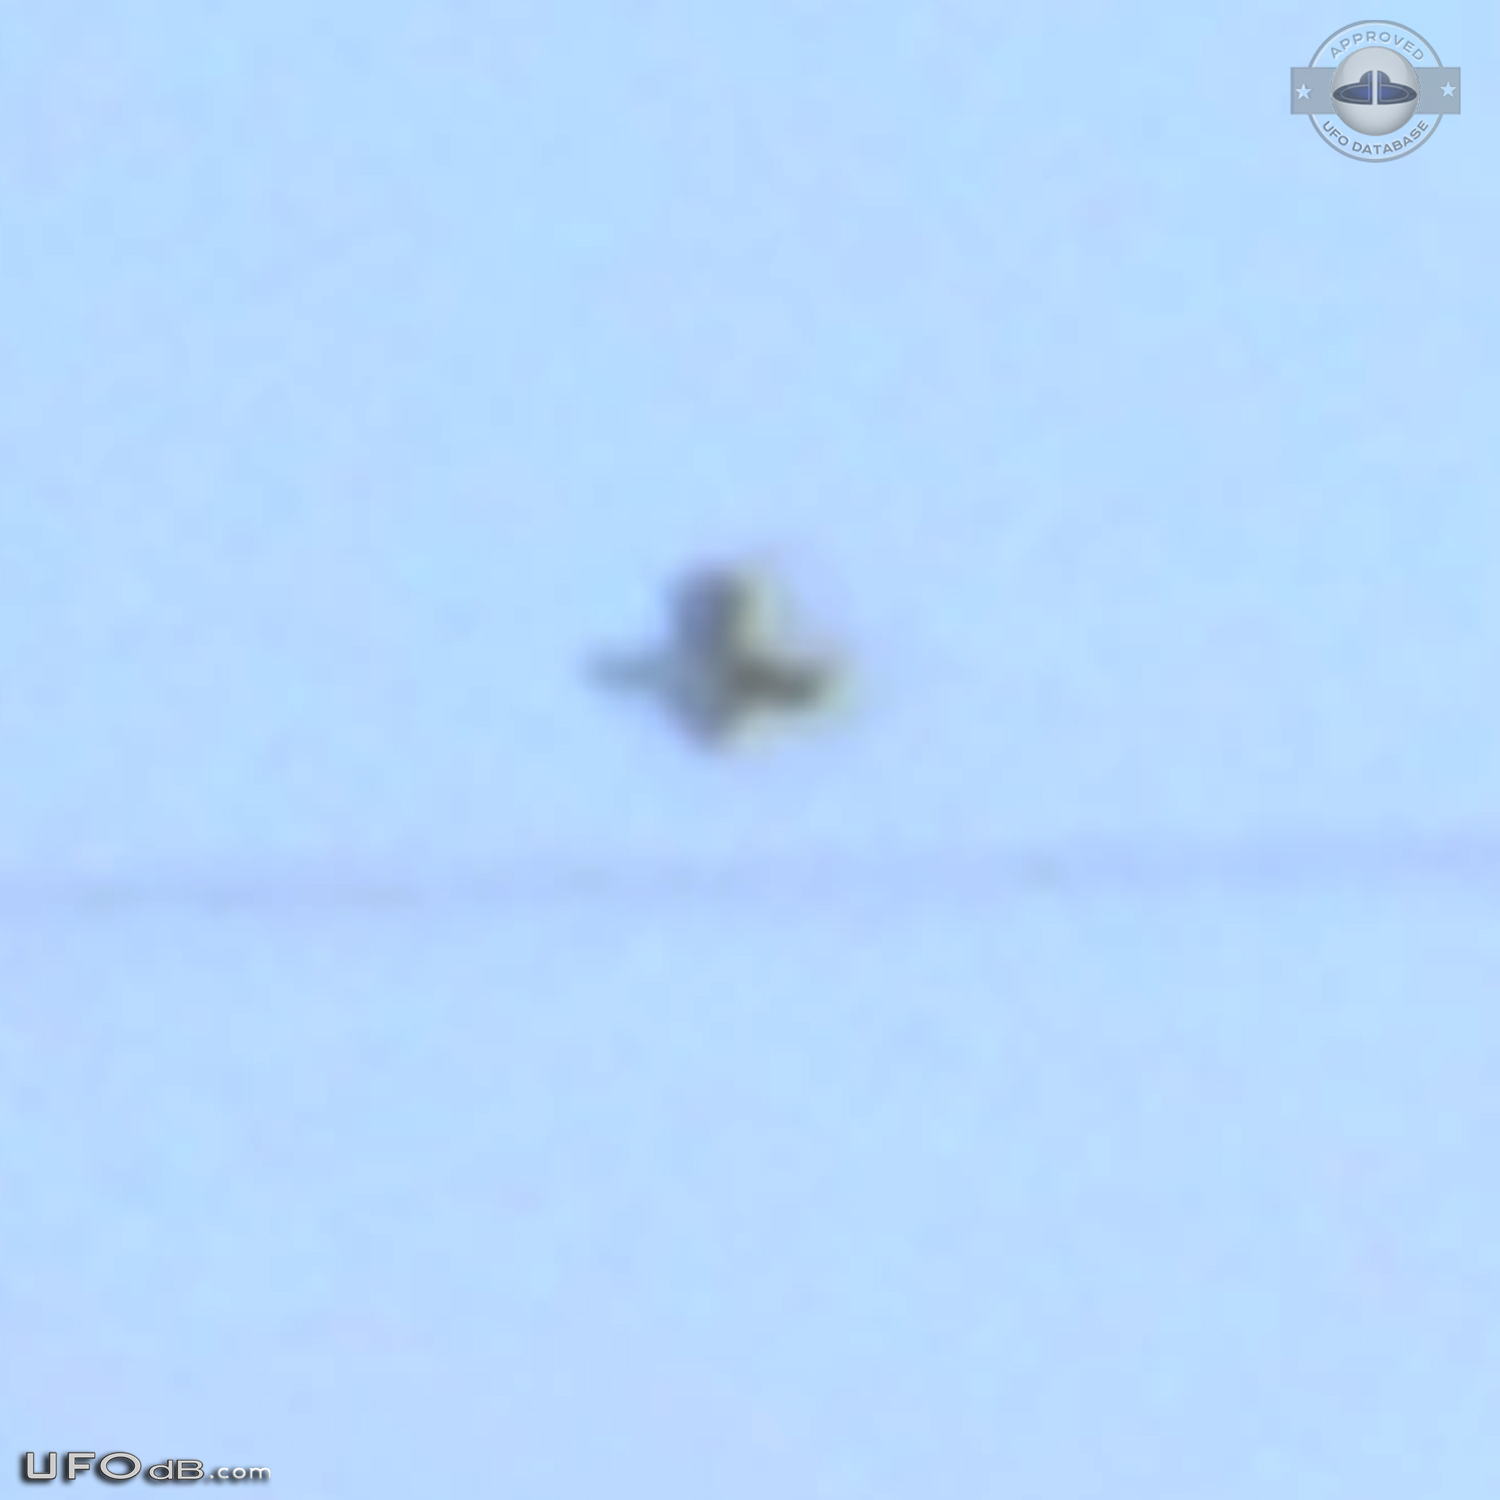 Strange Shaped UFO rarely seen caught on picture Istanbul Turkey 2014 UFO Picture #568-5